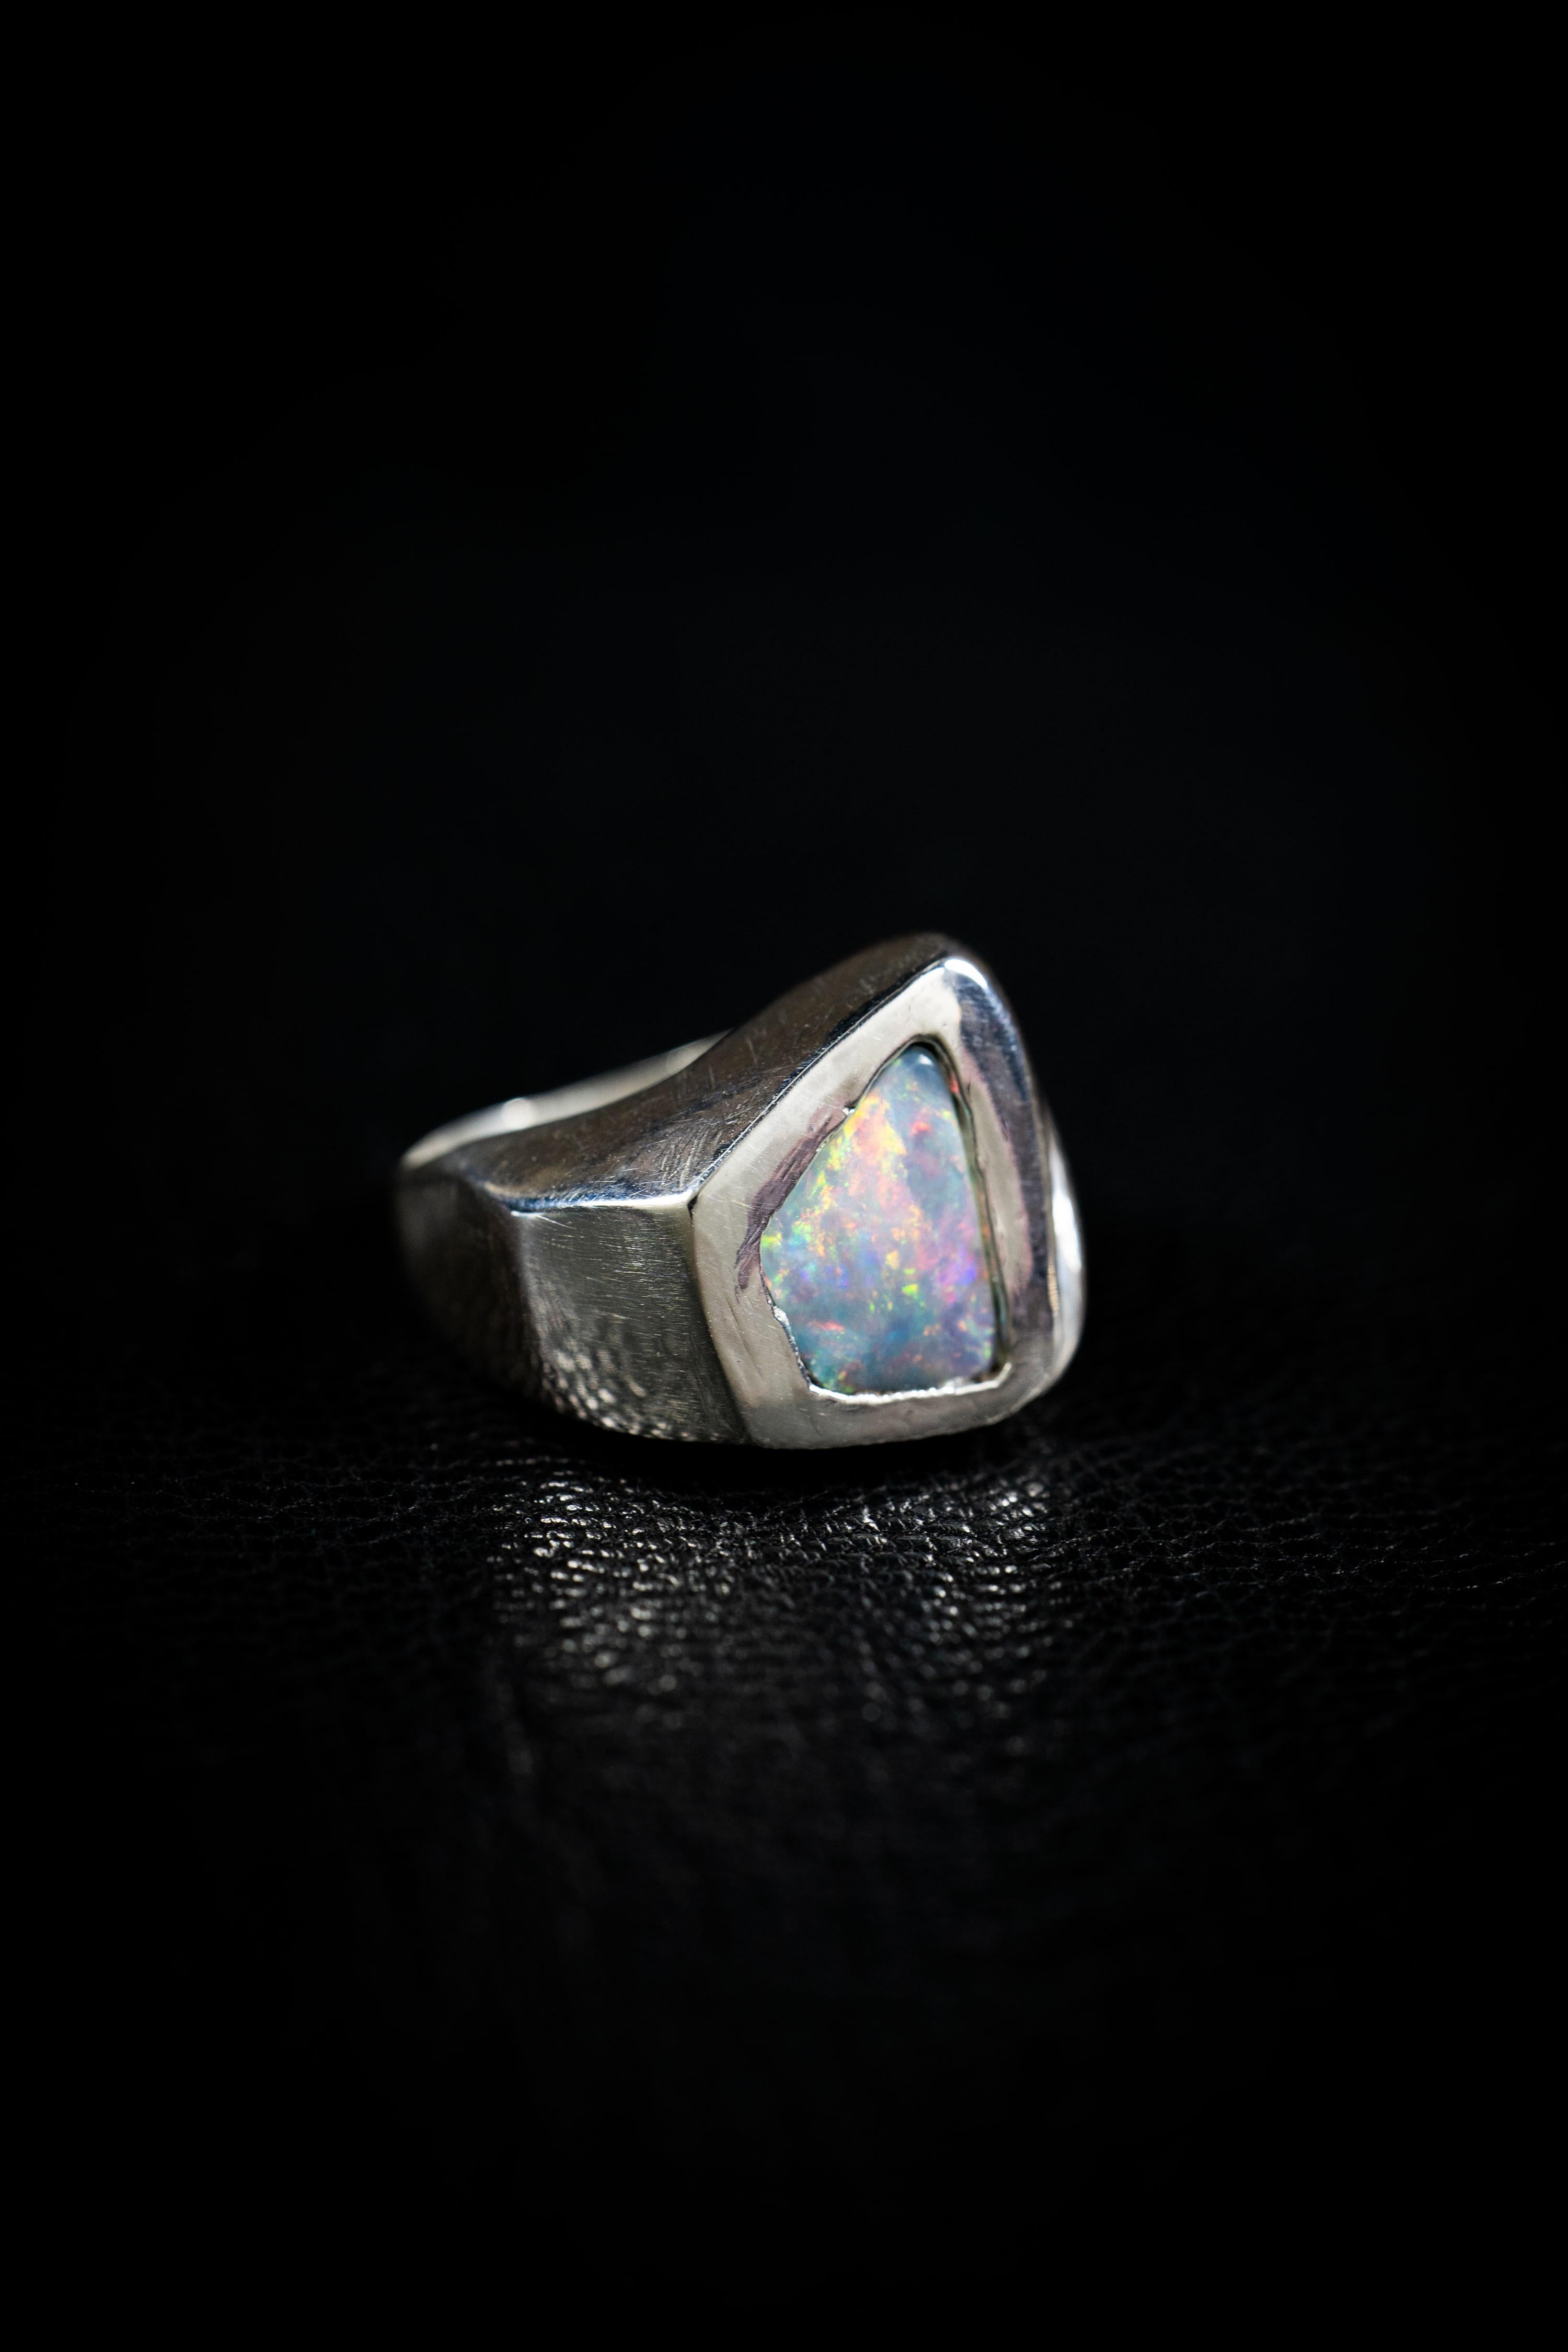 Cabochon Through Dimensions (Australian Opal, Sterling Silver Ring) by Ken Fury For Sale